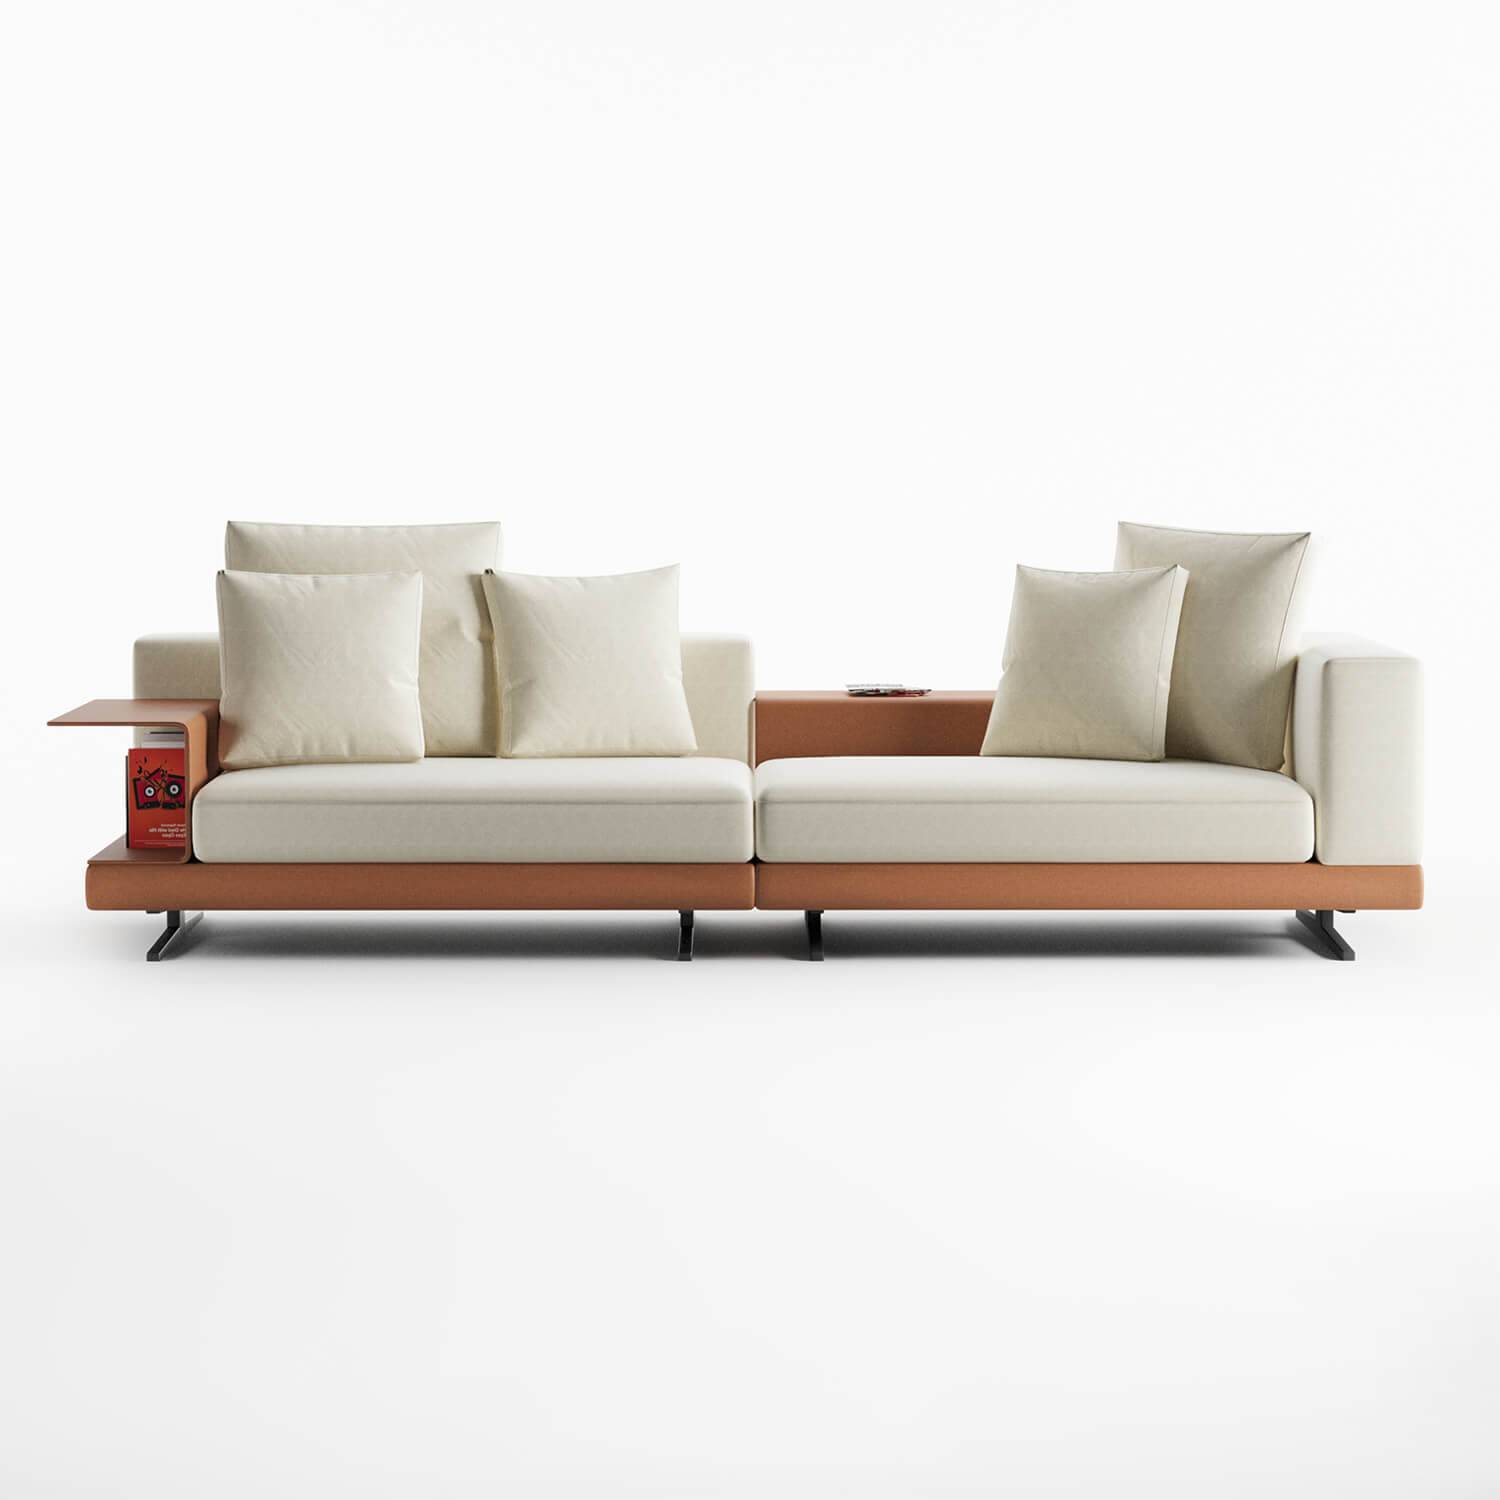 benedict 3 seater sofa with side table